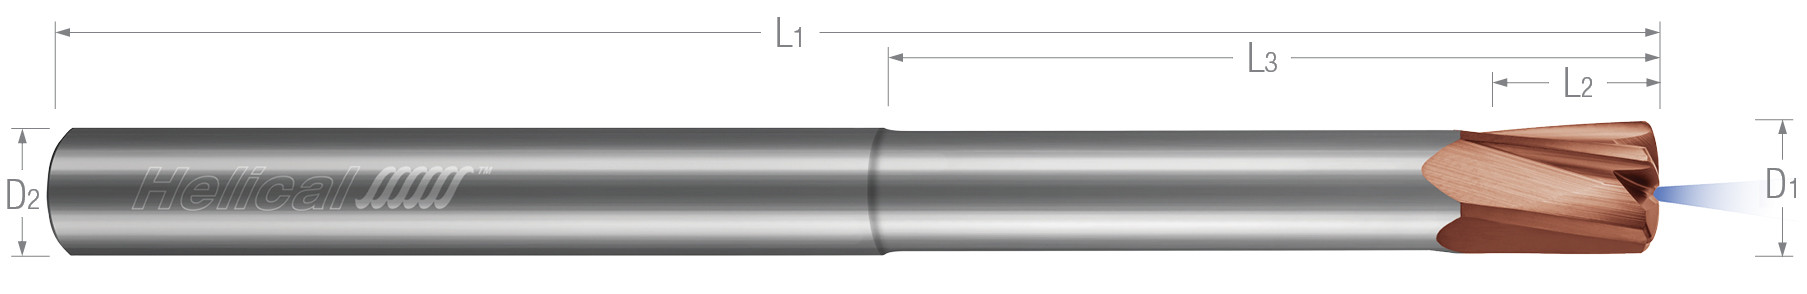 High Feed End Mills - Steels up to 45 Rc - Metric - Variable Pitch - Coolant Through - Reduced Neck